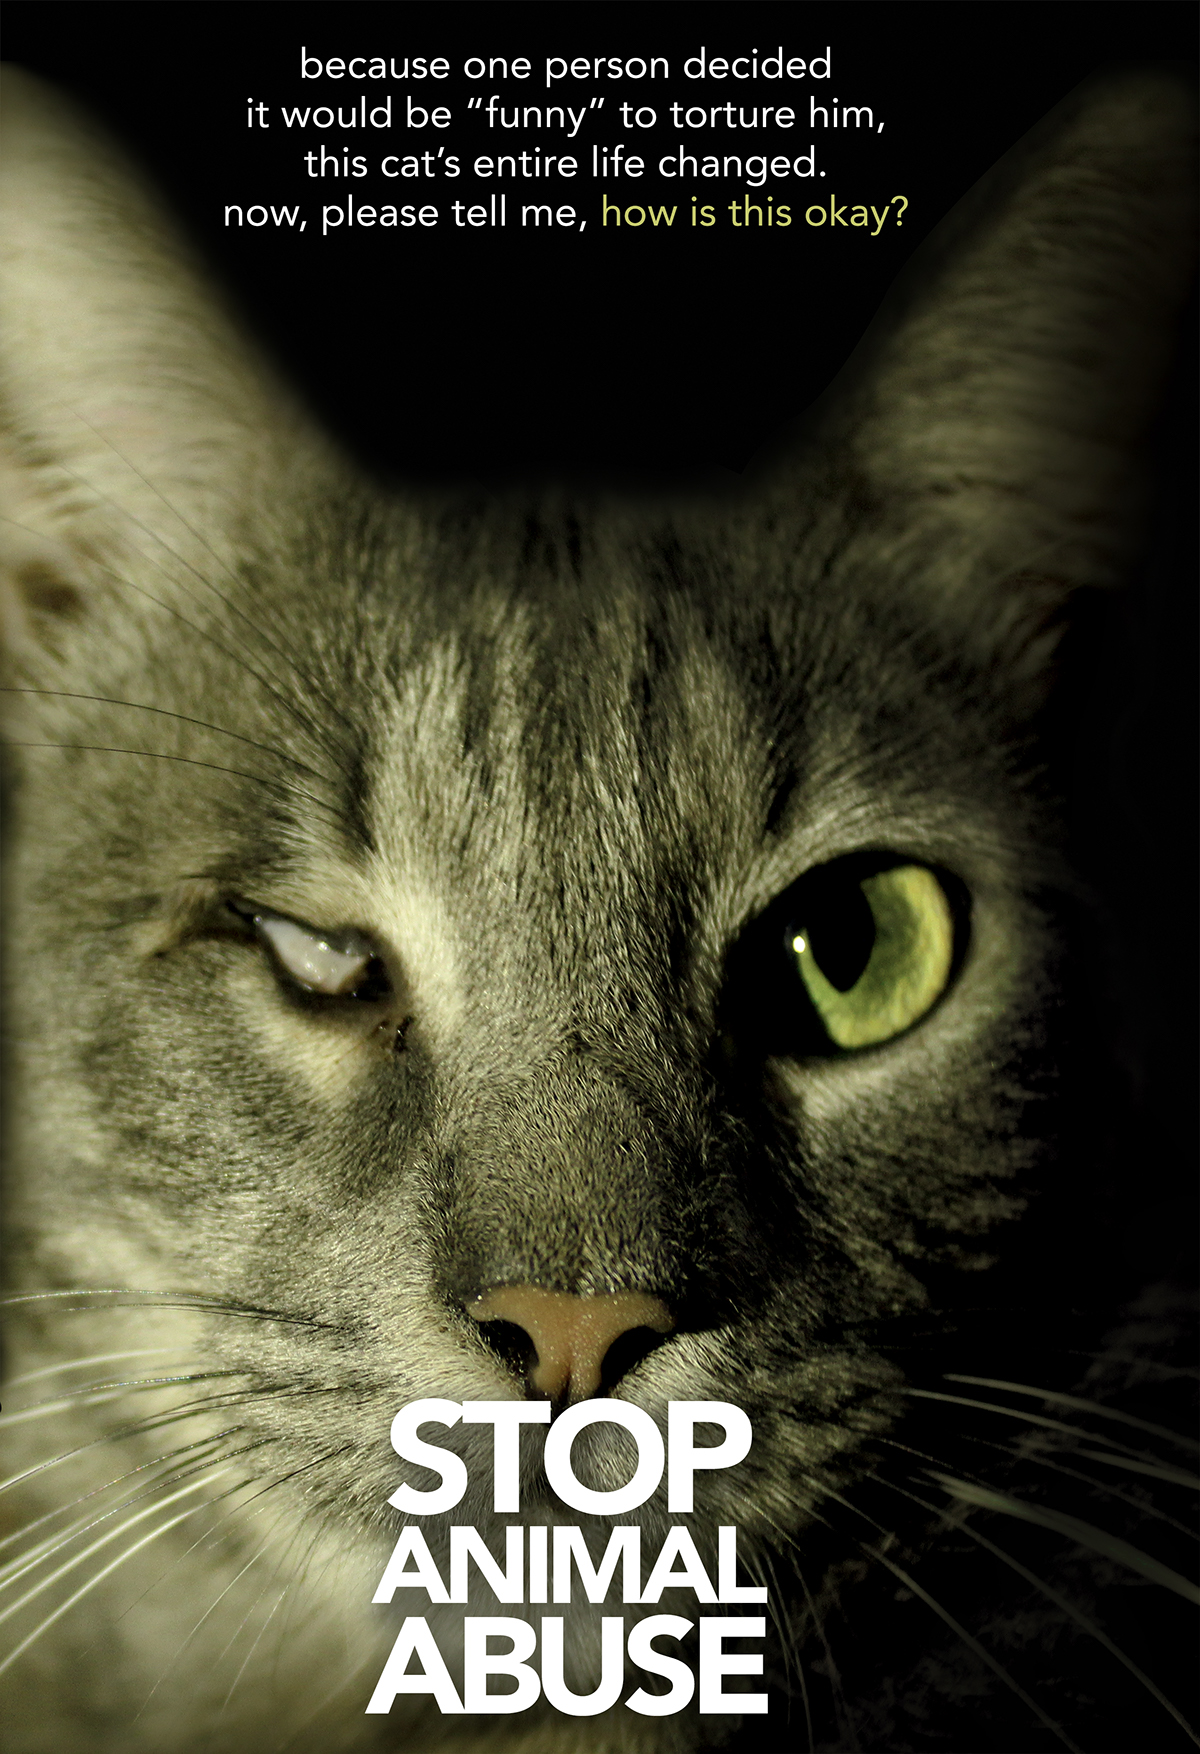 Stop Animal Abuse Advocacy Poster on Behance